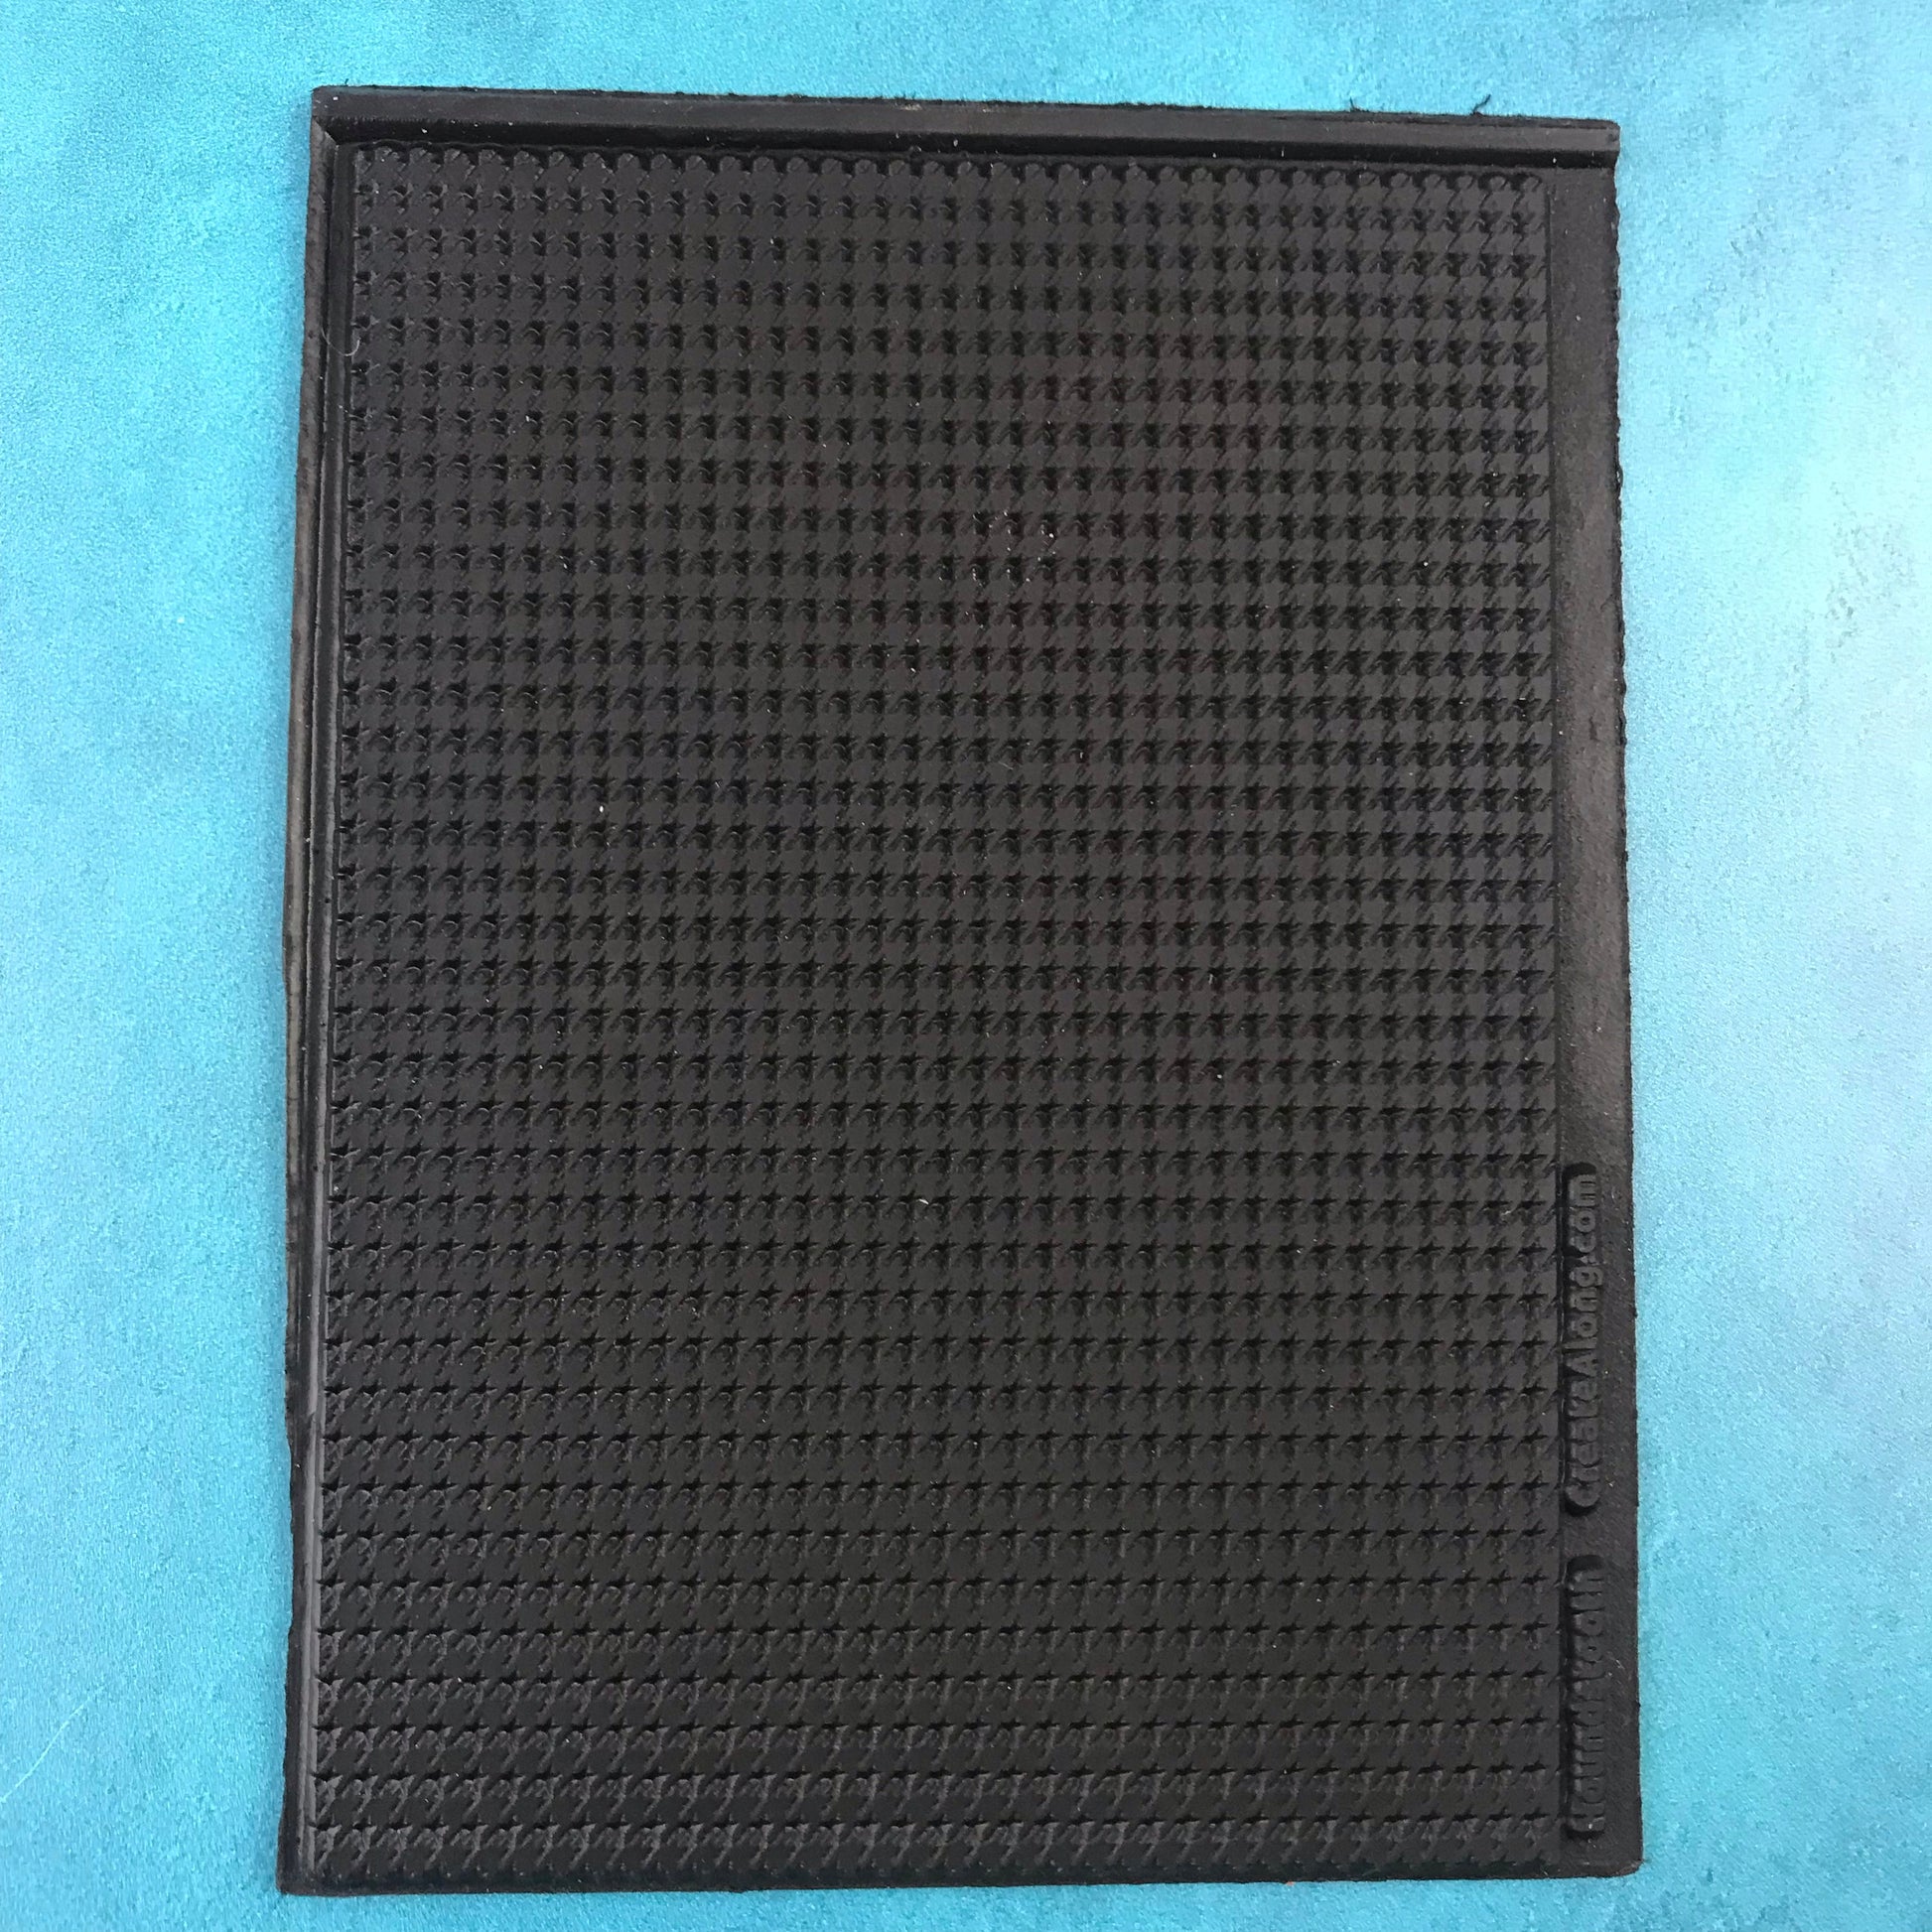 Rubber Texture Mats Design at Best Prices 